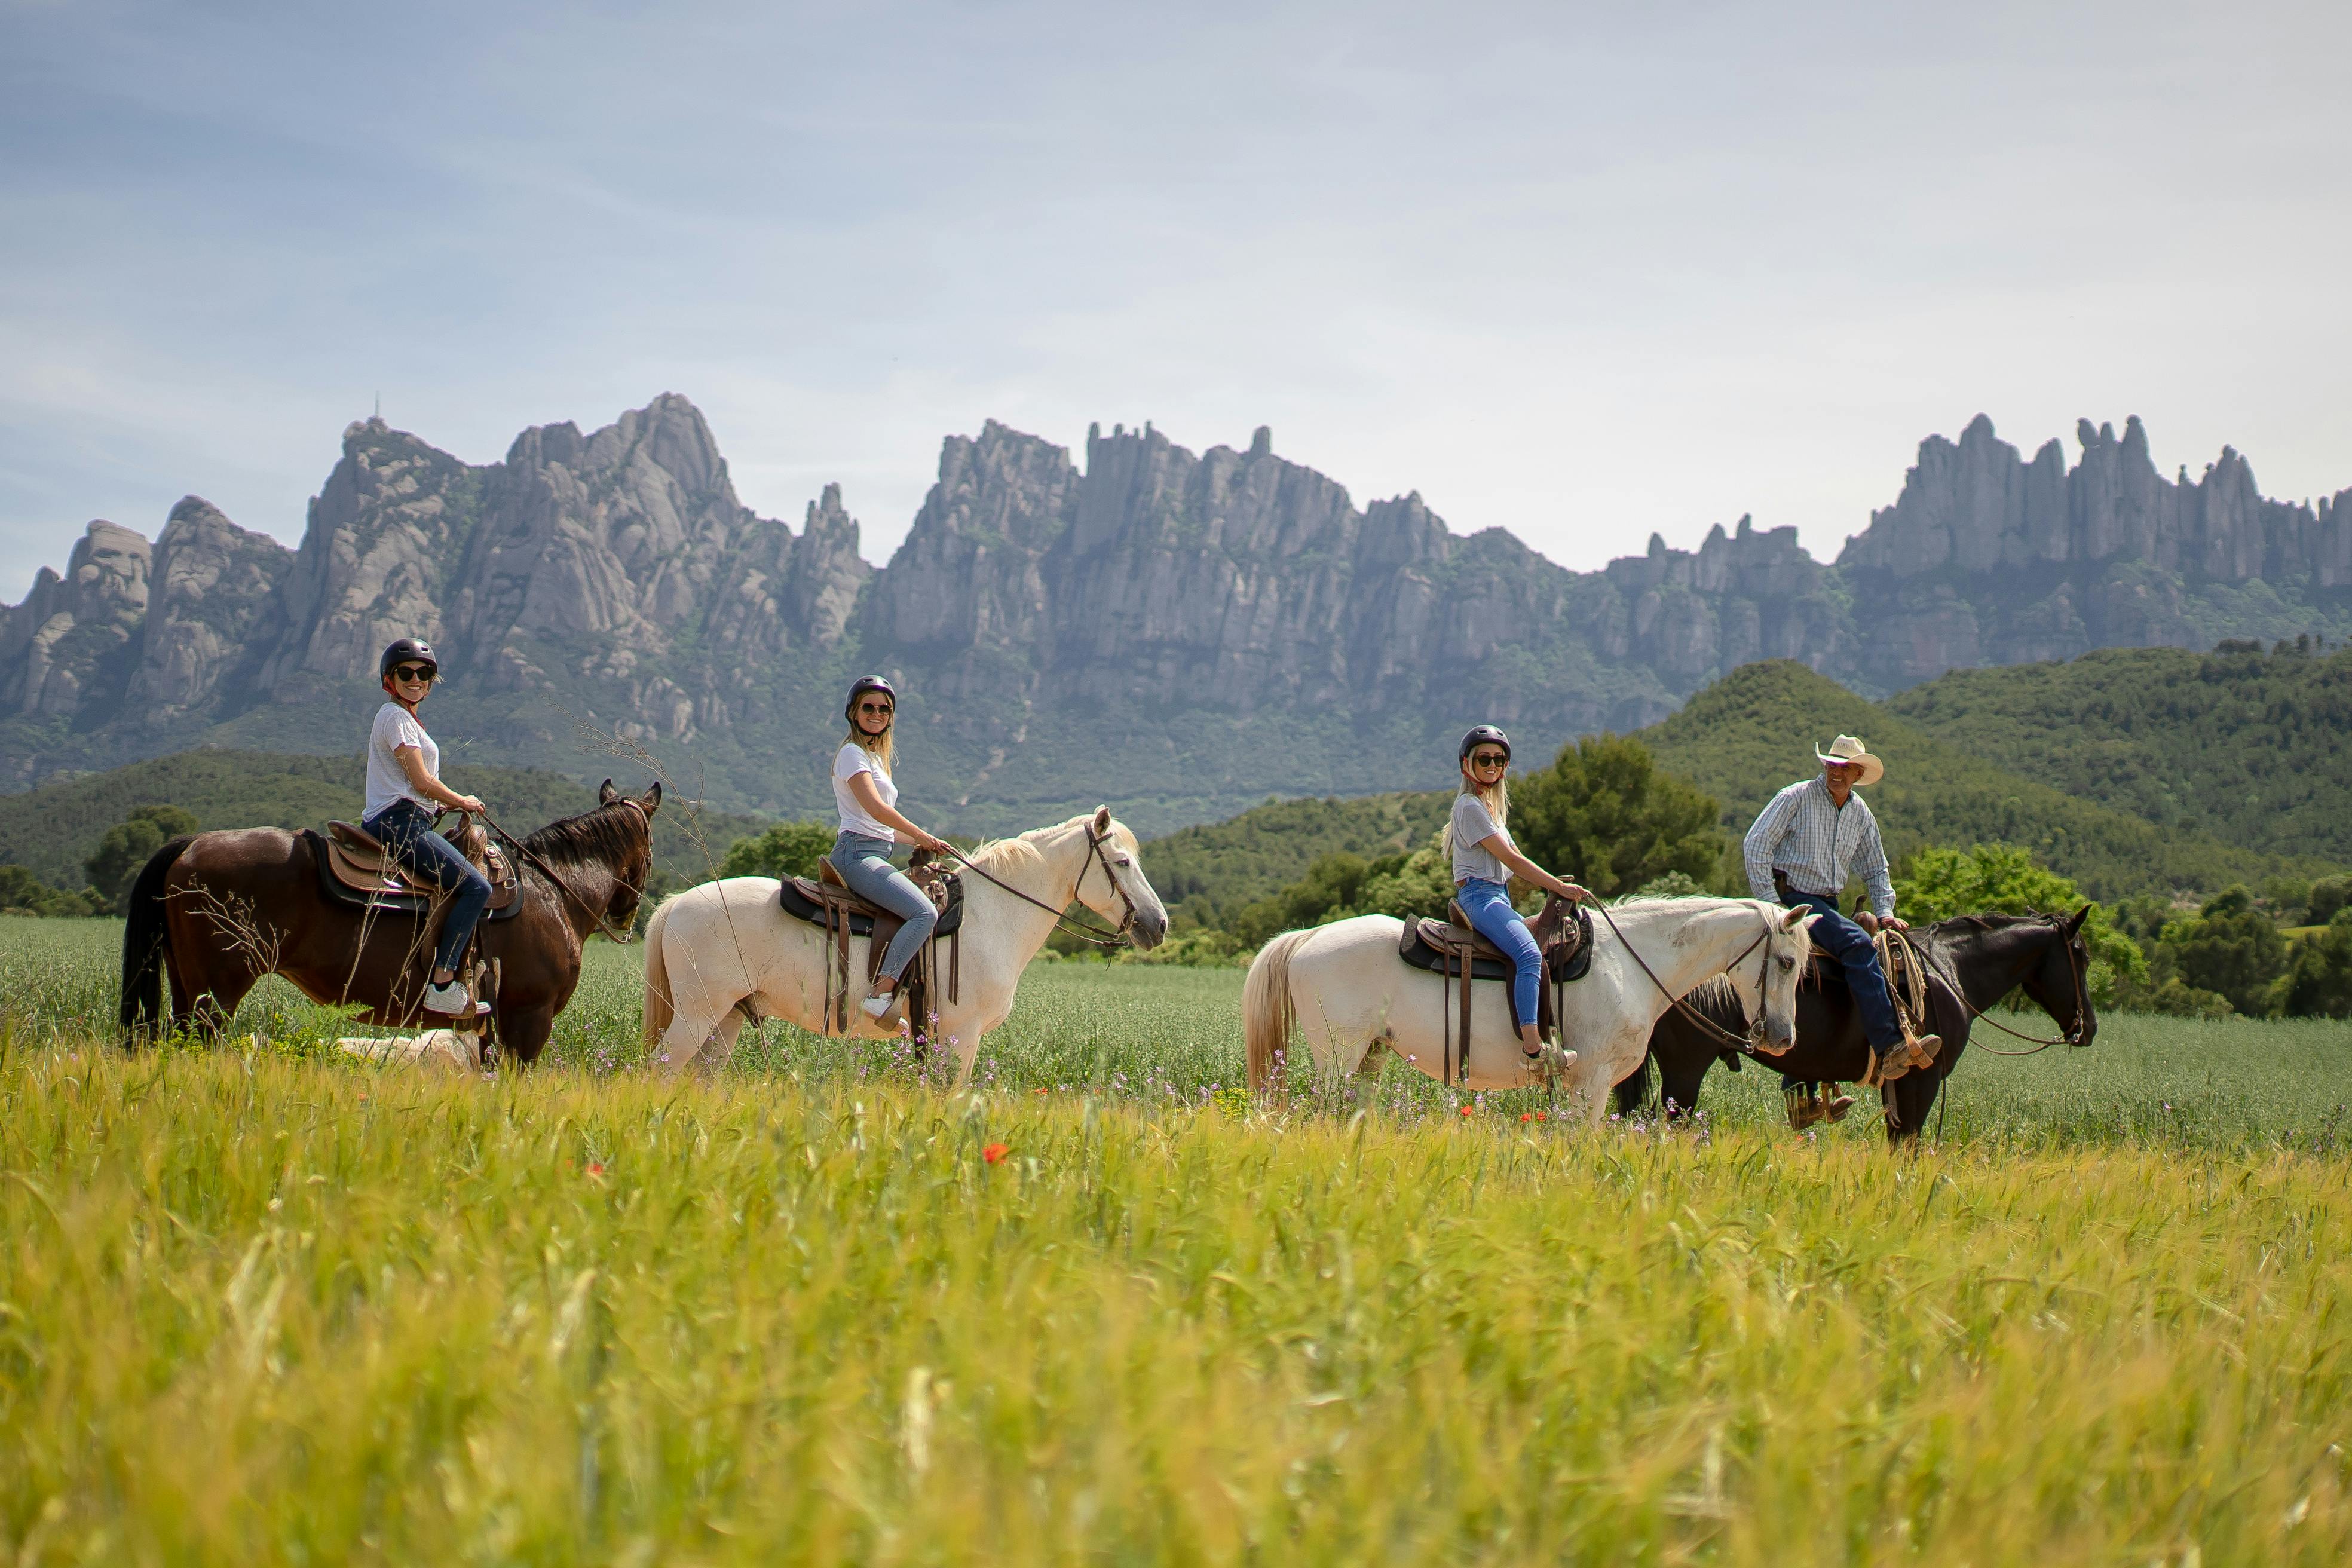 Montserrat guided tour and riding experience with private transport from Barcelona Musement